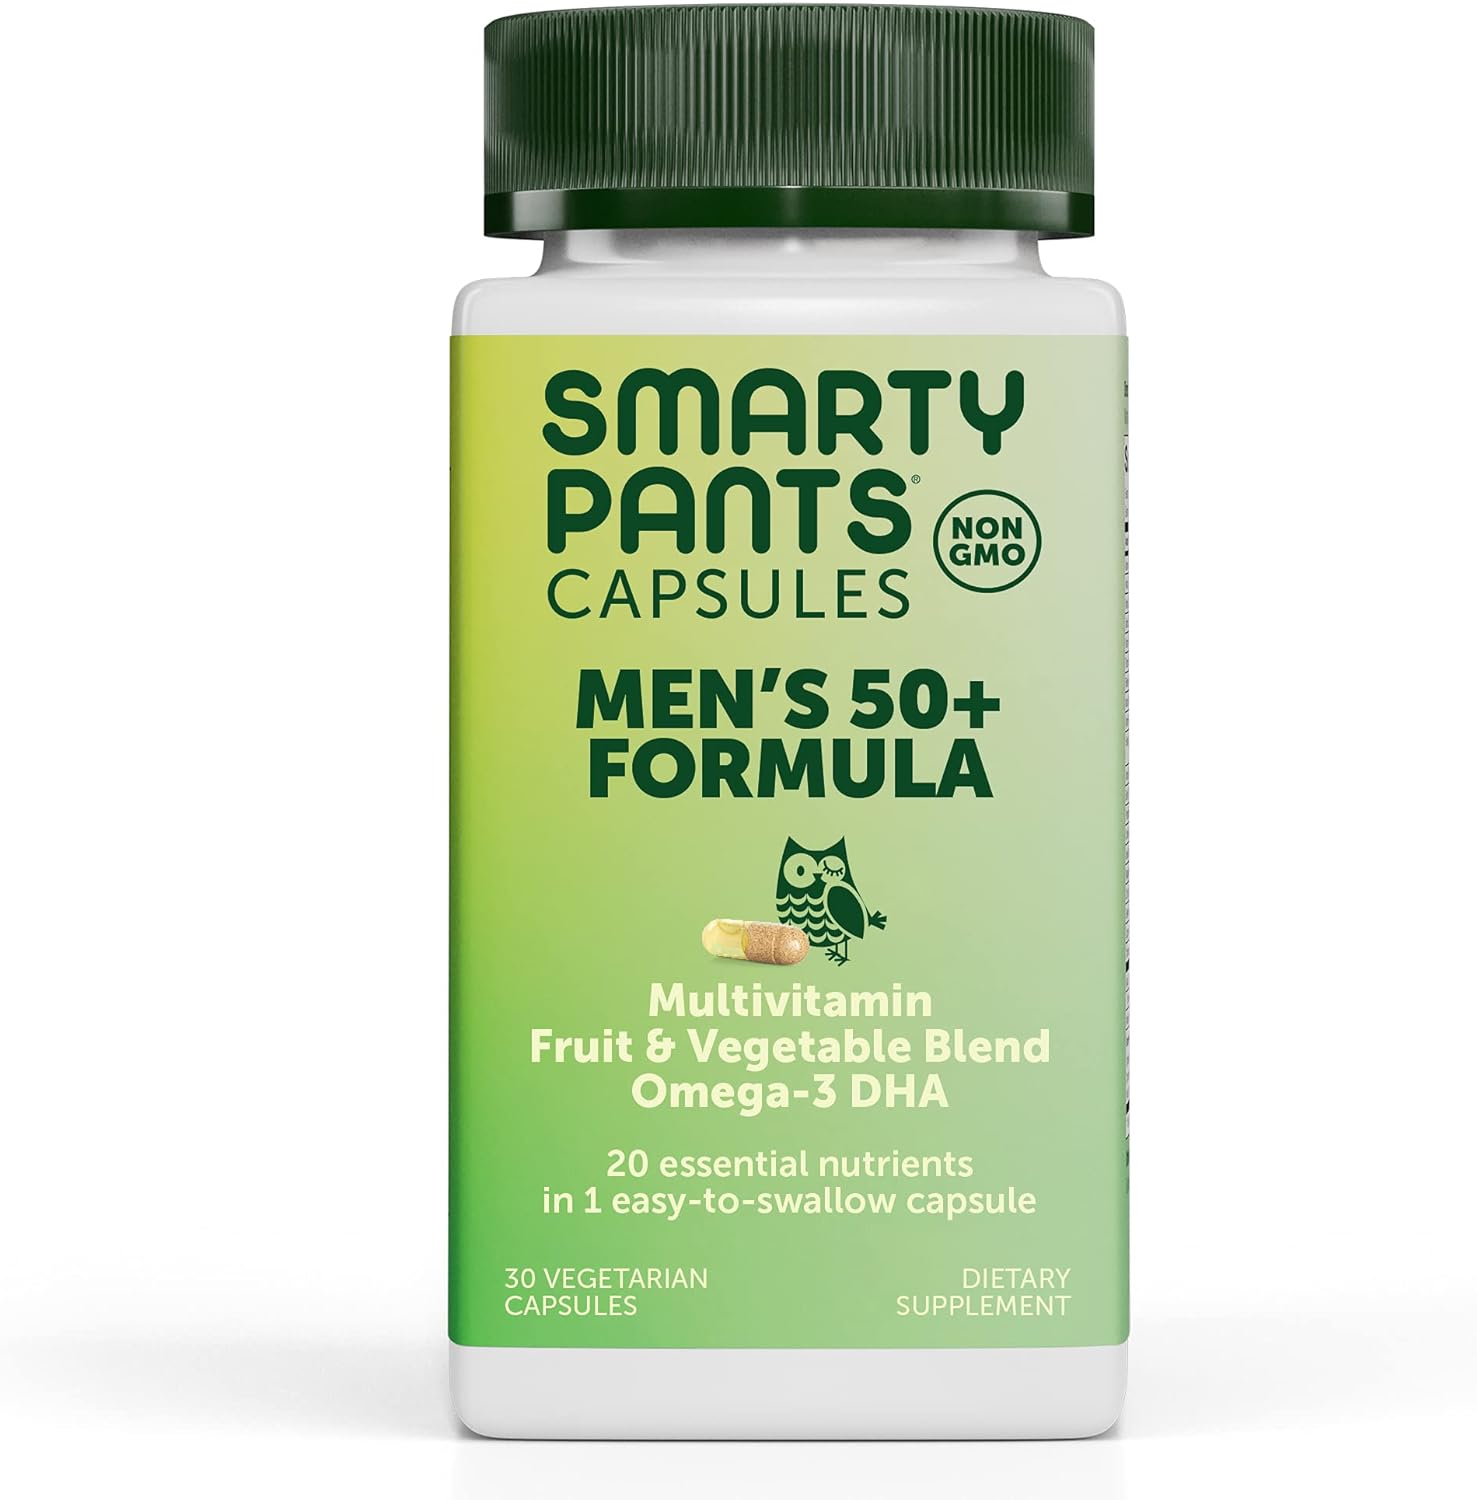 SmartyPants Multivitamin for Men 50+: Omega-3 DHA, Zinc for Immunity, Vitamins D3, C, B6, B12, Vitamin A for Eyes, Folate, Selenium, One Per Day, 30 Capsules, 30 Day Supply